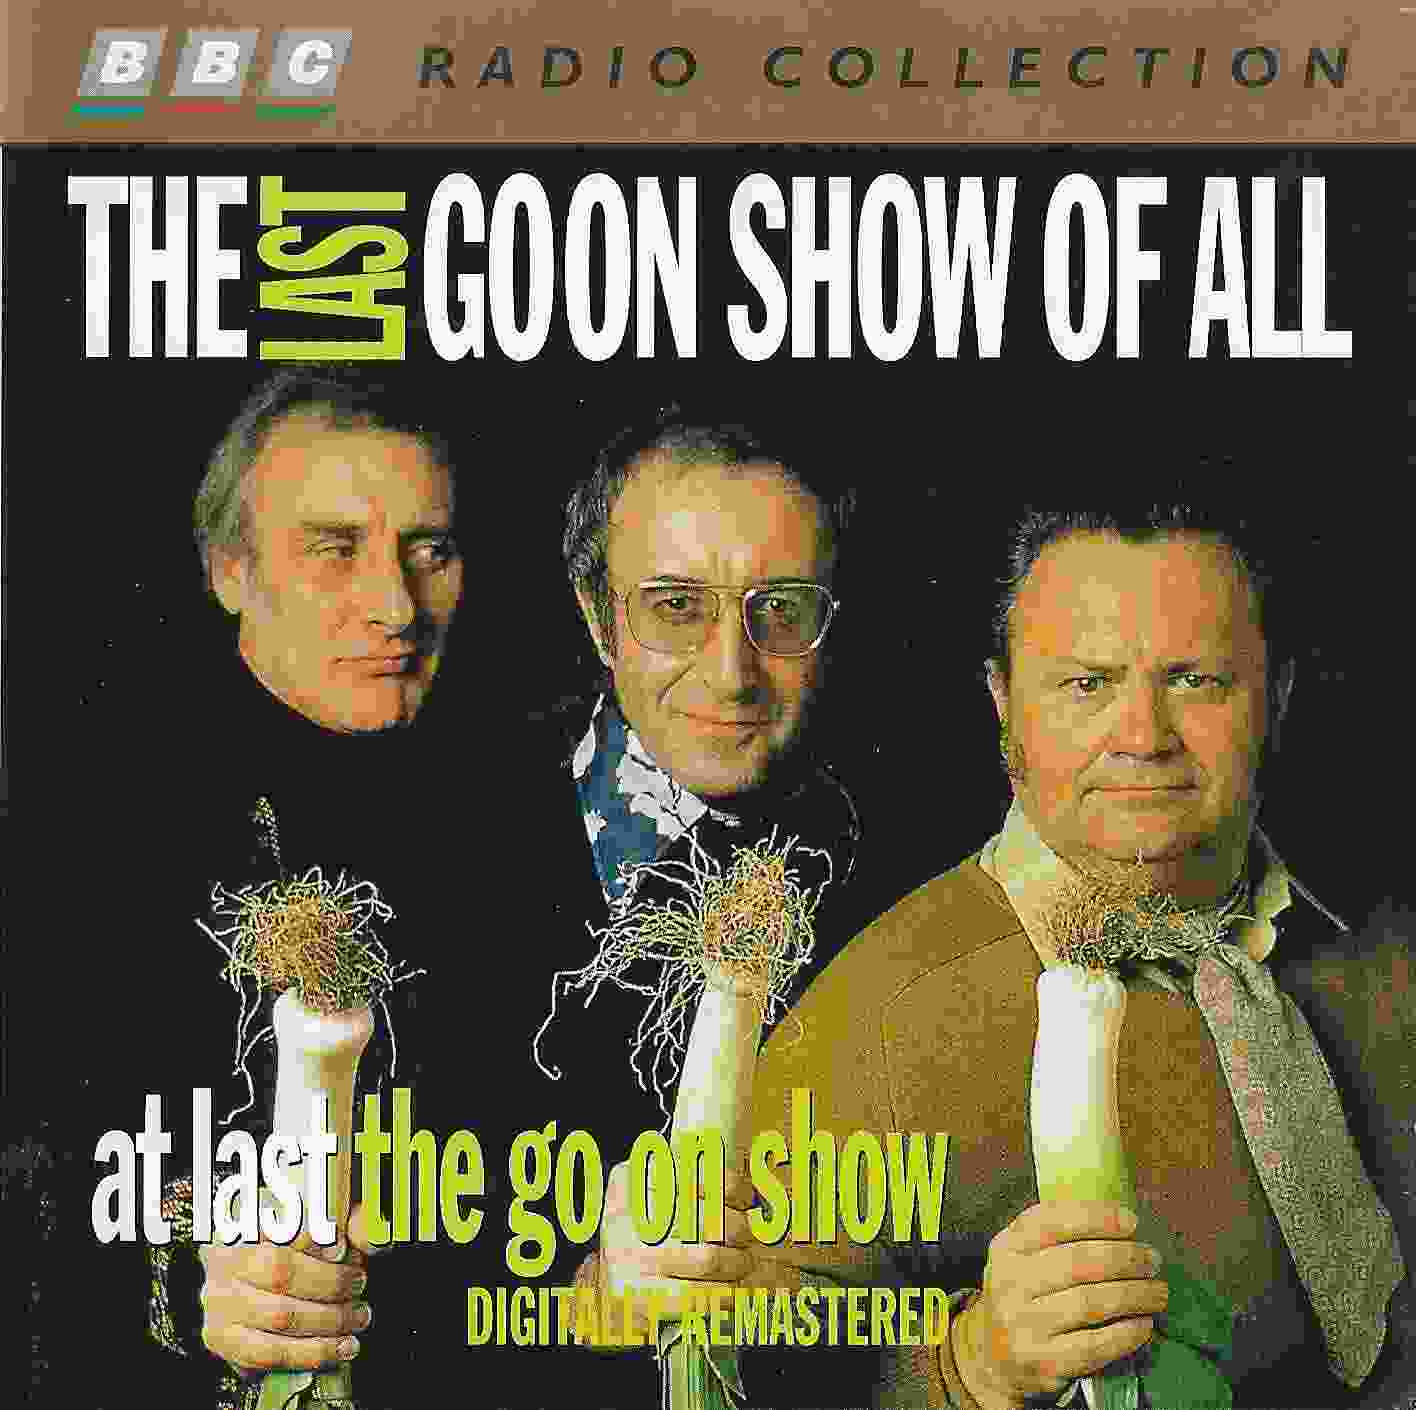 Picture of ZBBC 2014 CD The last goon show of all / At last the goon show by artist Spike Milligan from the BBC cds - Records and Tapes library